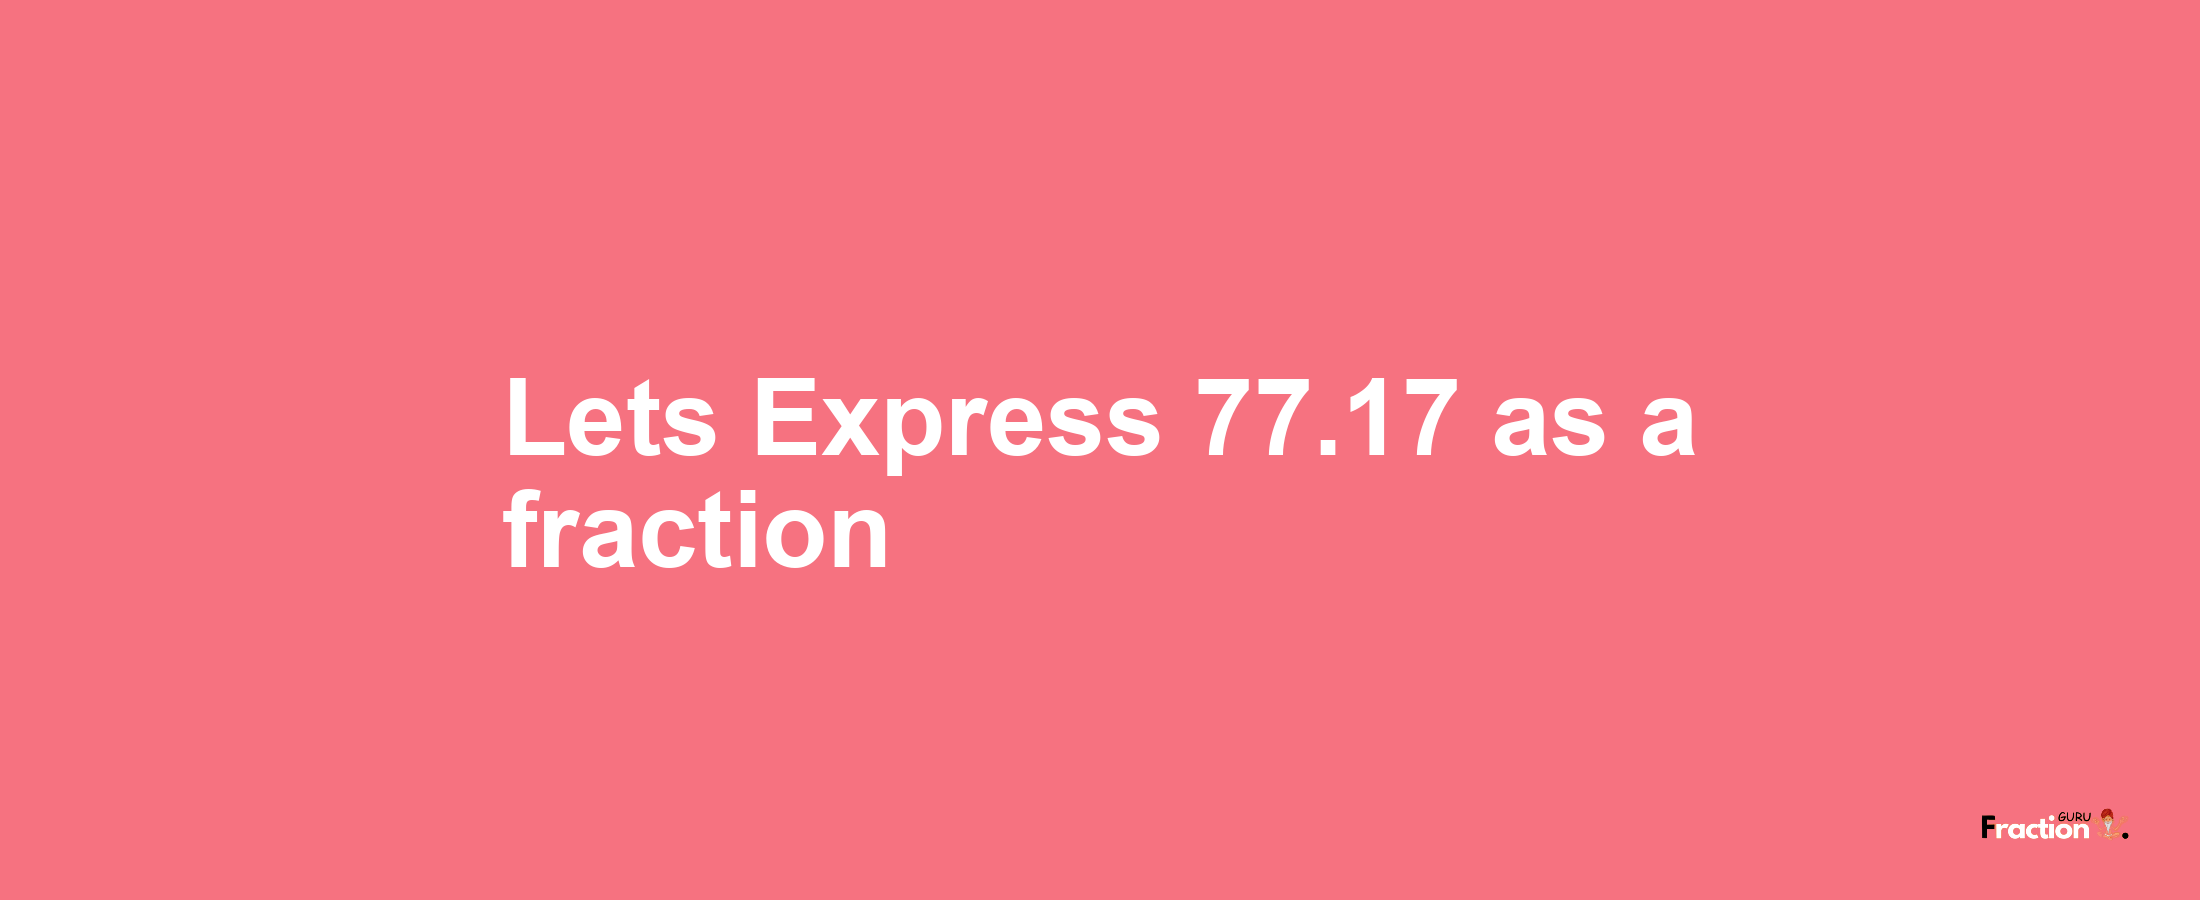 Lets Express 77.17 as afraction